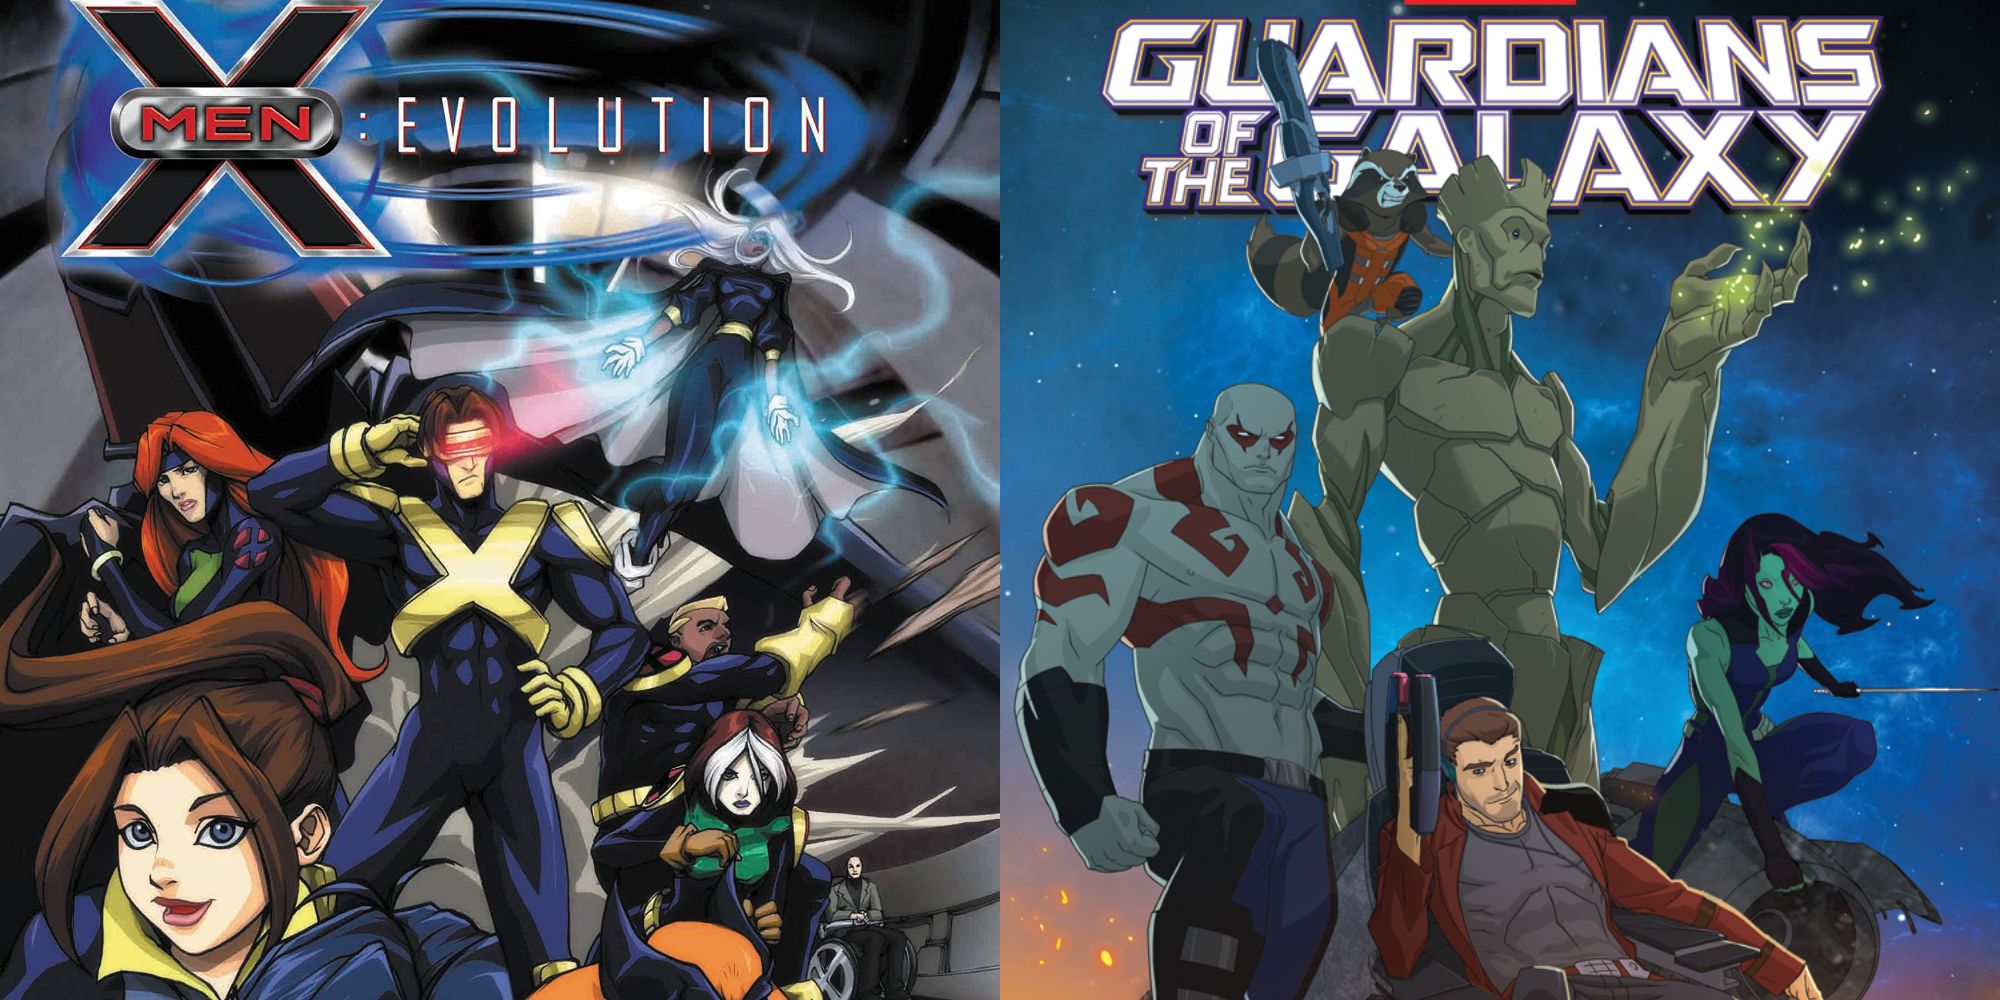 Split image showing posters for X-Men Evolution and Guardians of the Galaxy.